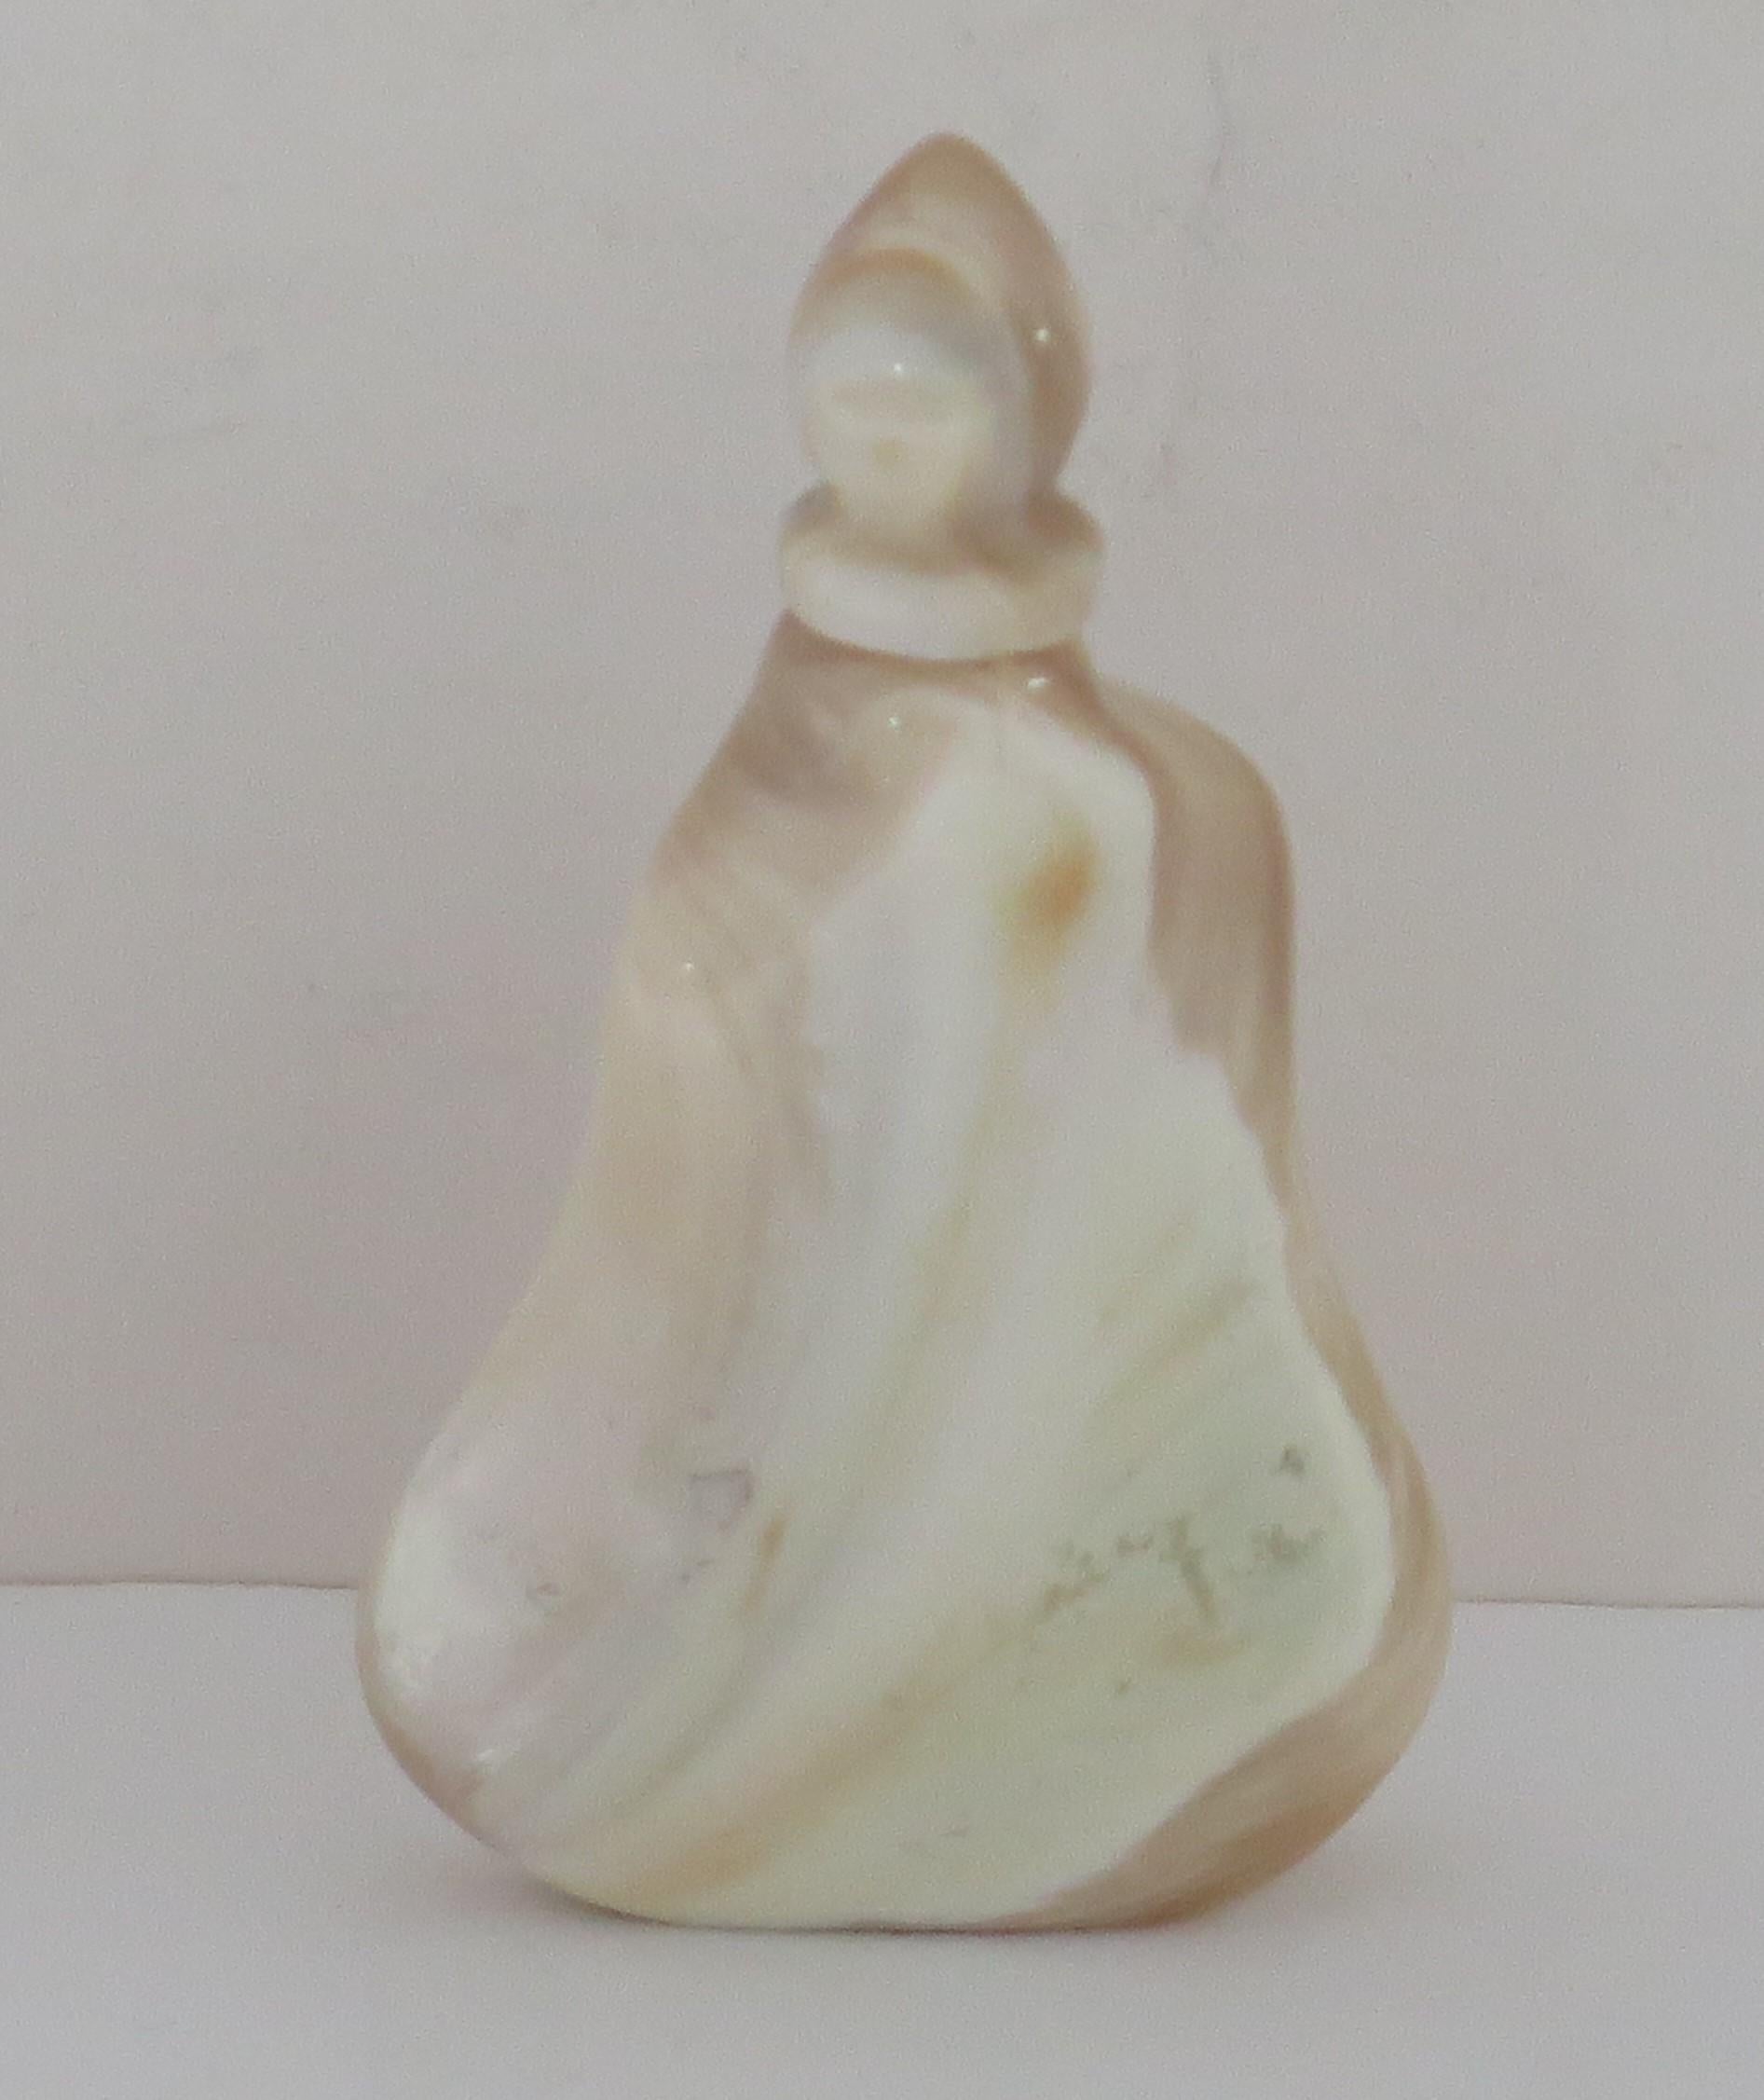 This is a very beautiful Chinese Export snuff bottle with a rare hand carved shape, complete with its matching top and made from natural agate stone, having lovely veined colors, which we date to the mid 20th century, Circa 1940.

The bottle has a